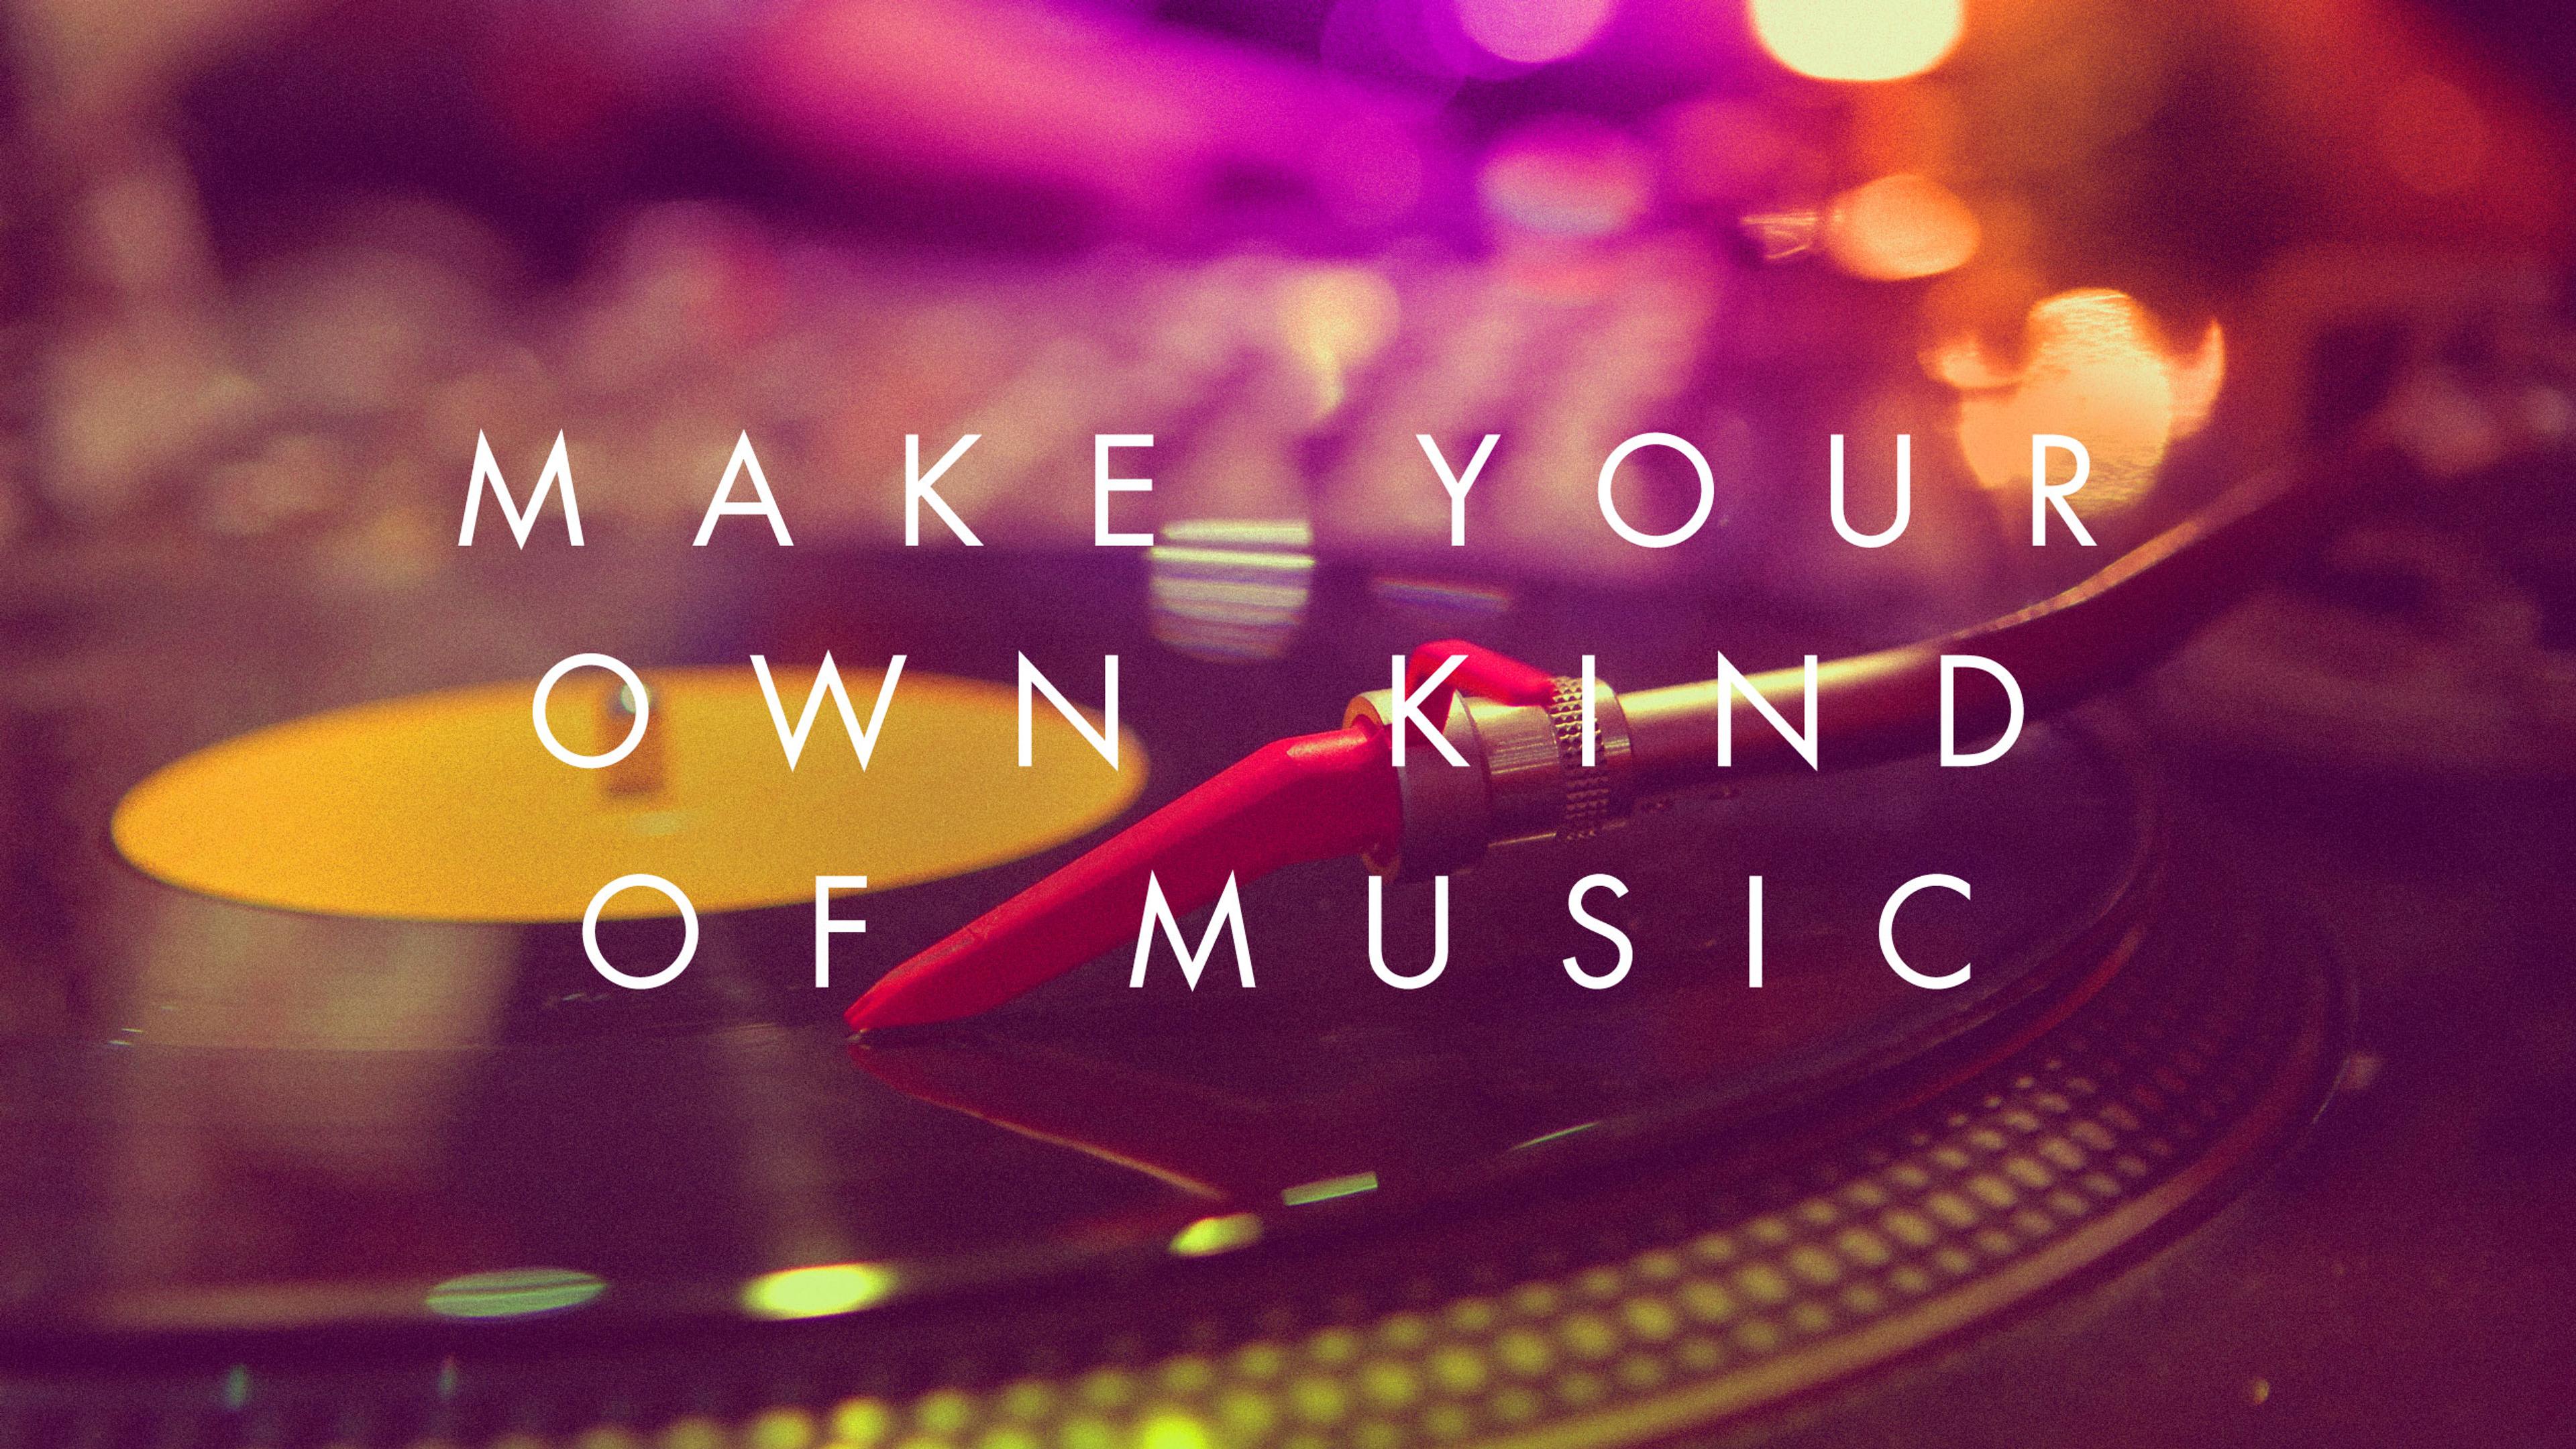 Make your own kind of music - Wallpaper with message